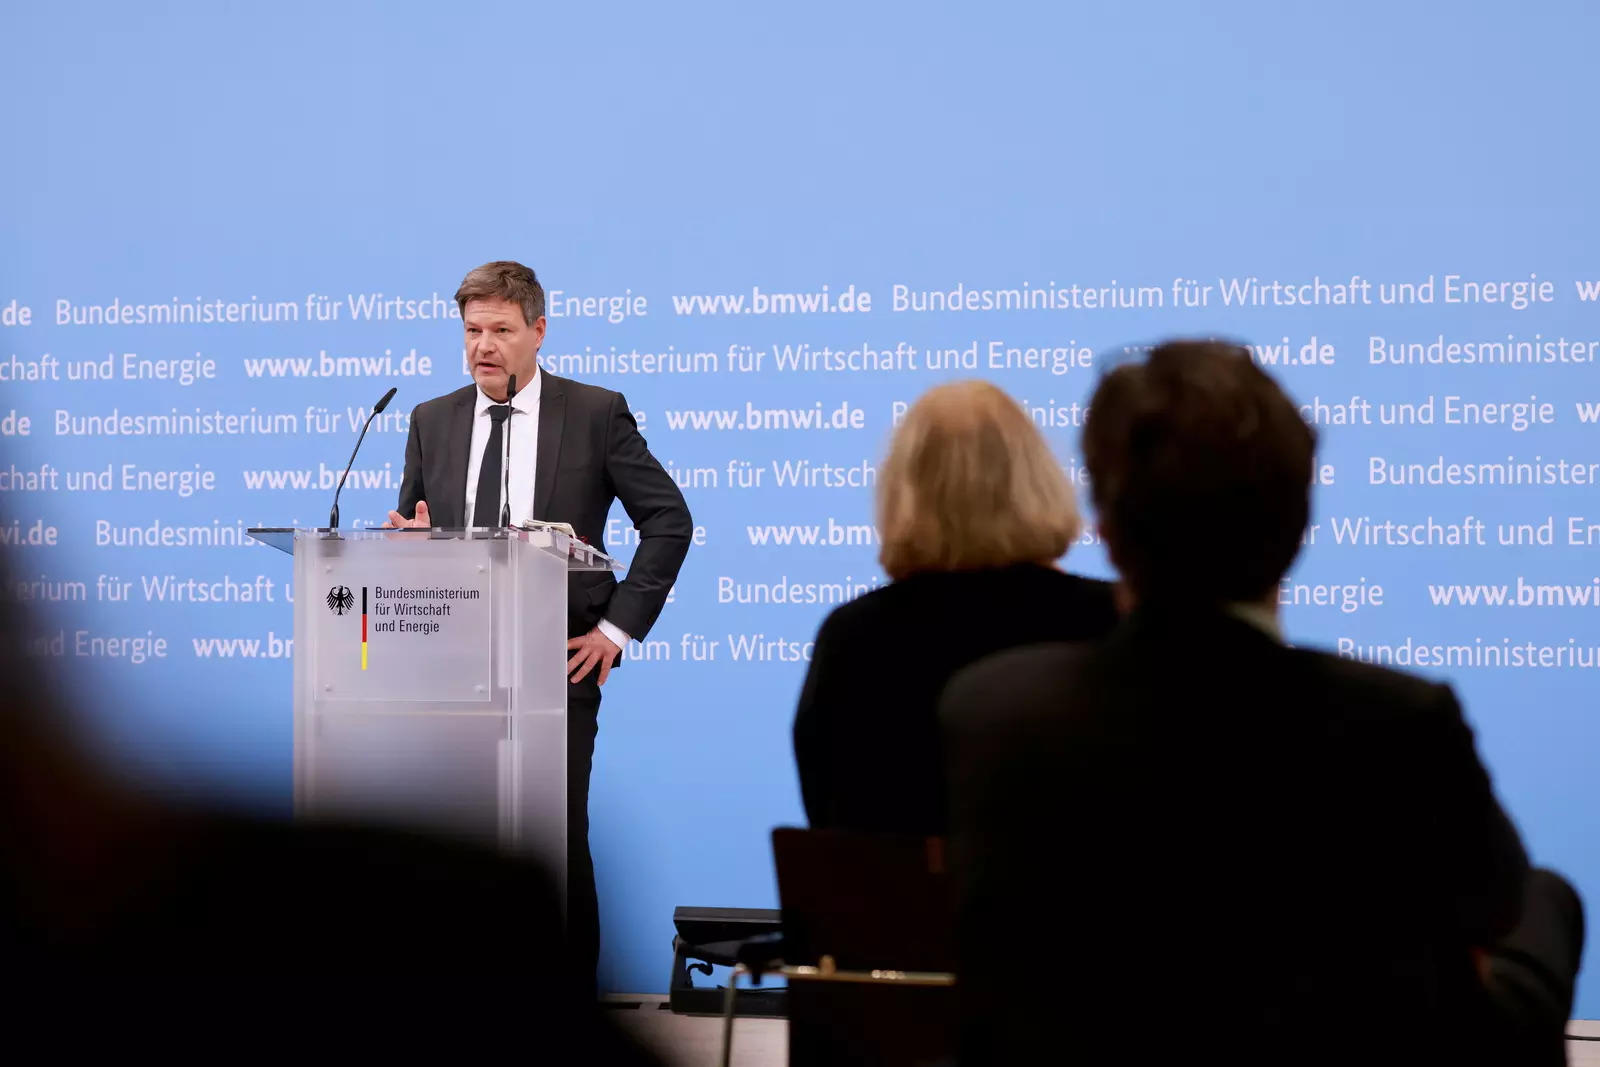 Robert Habeck, Germany's new economy and climate minister, said the government is trying to ensure &quot;continuity&quot; while it works on a new system.